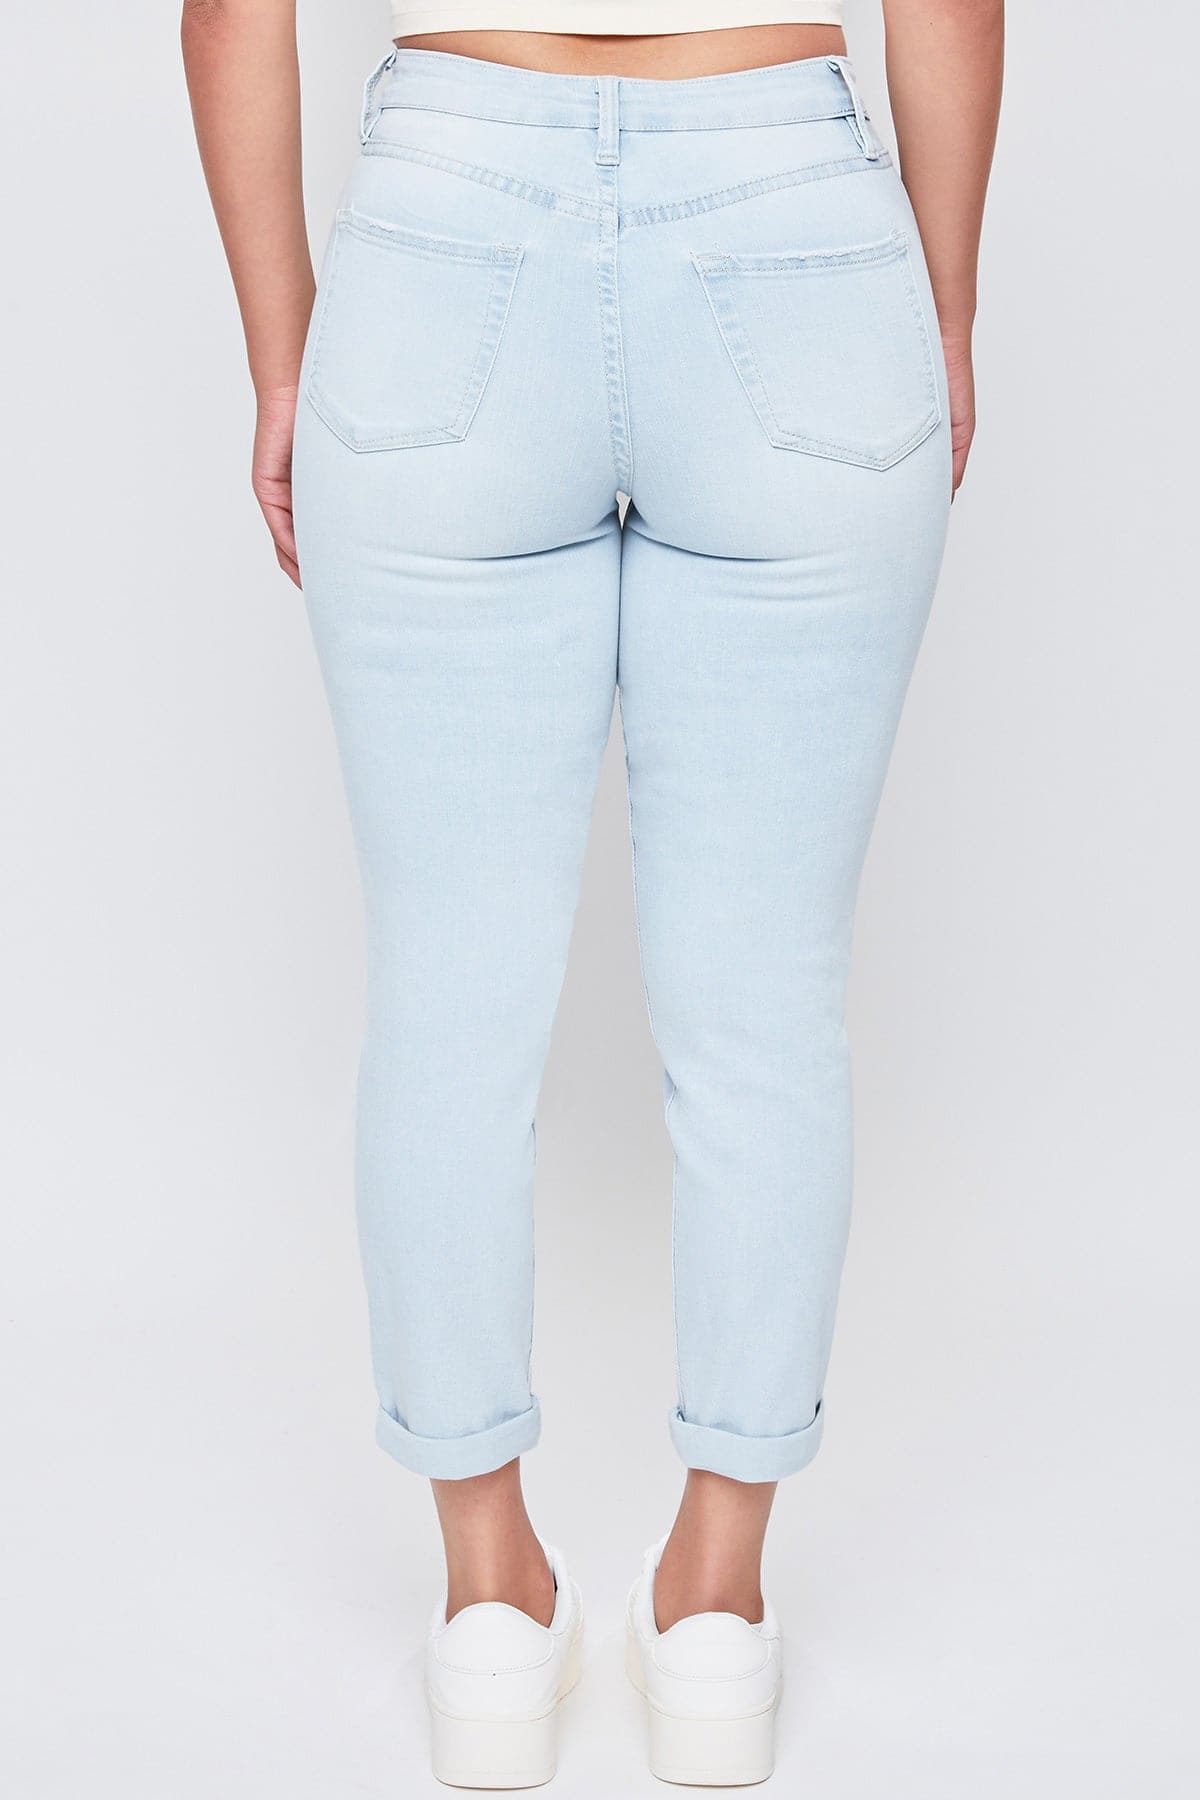 Women’s Hybrid Dream Mom Fit Ankle Jeans-Sale